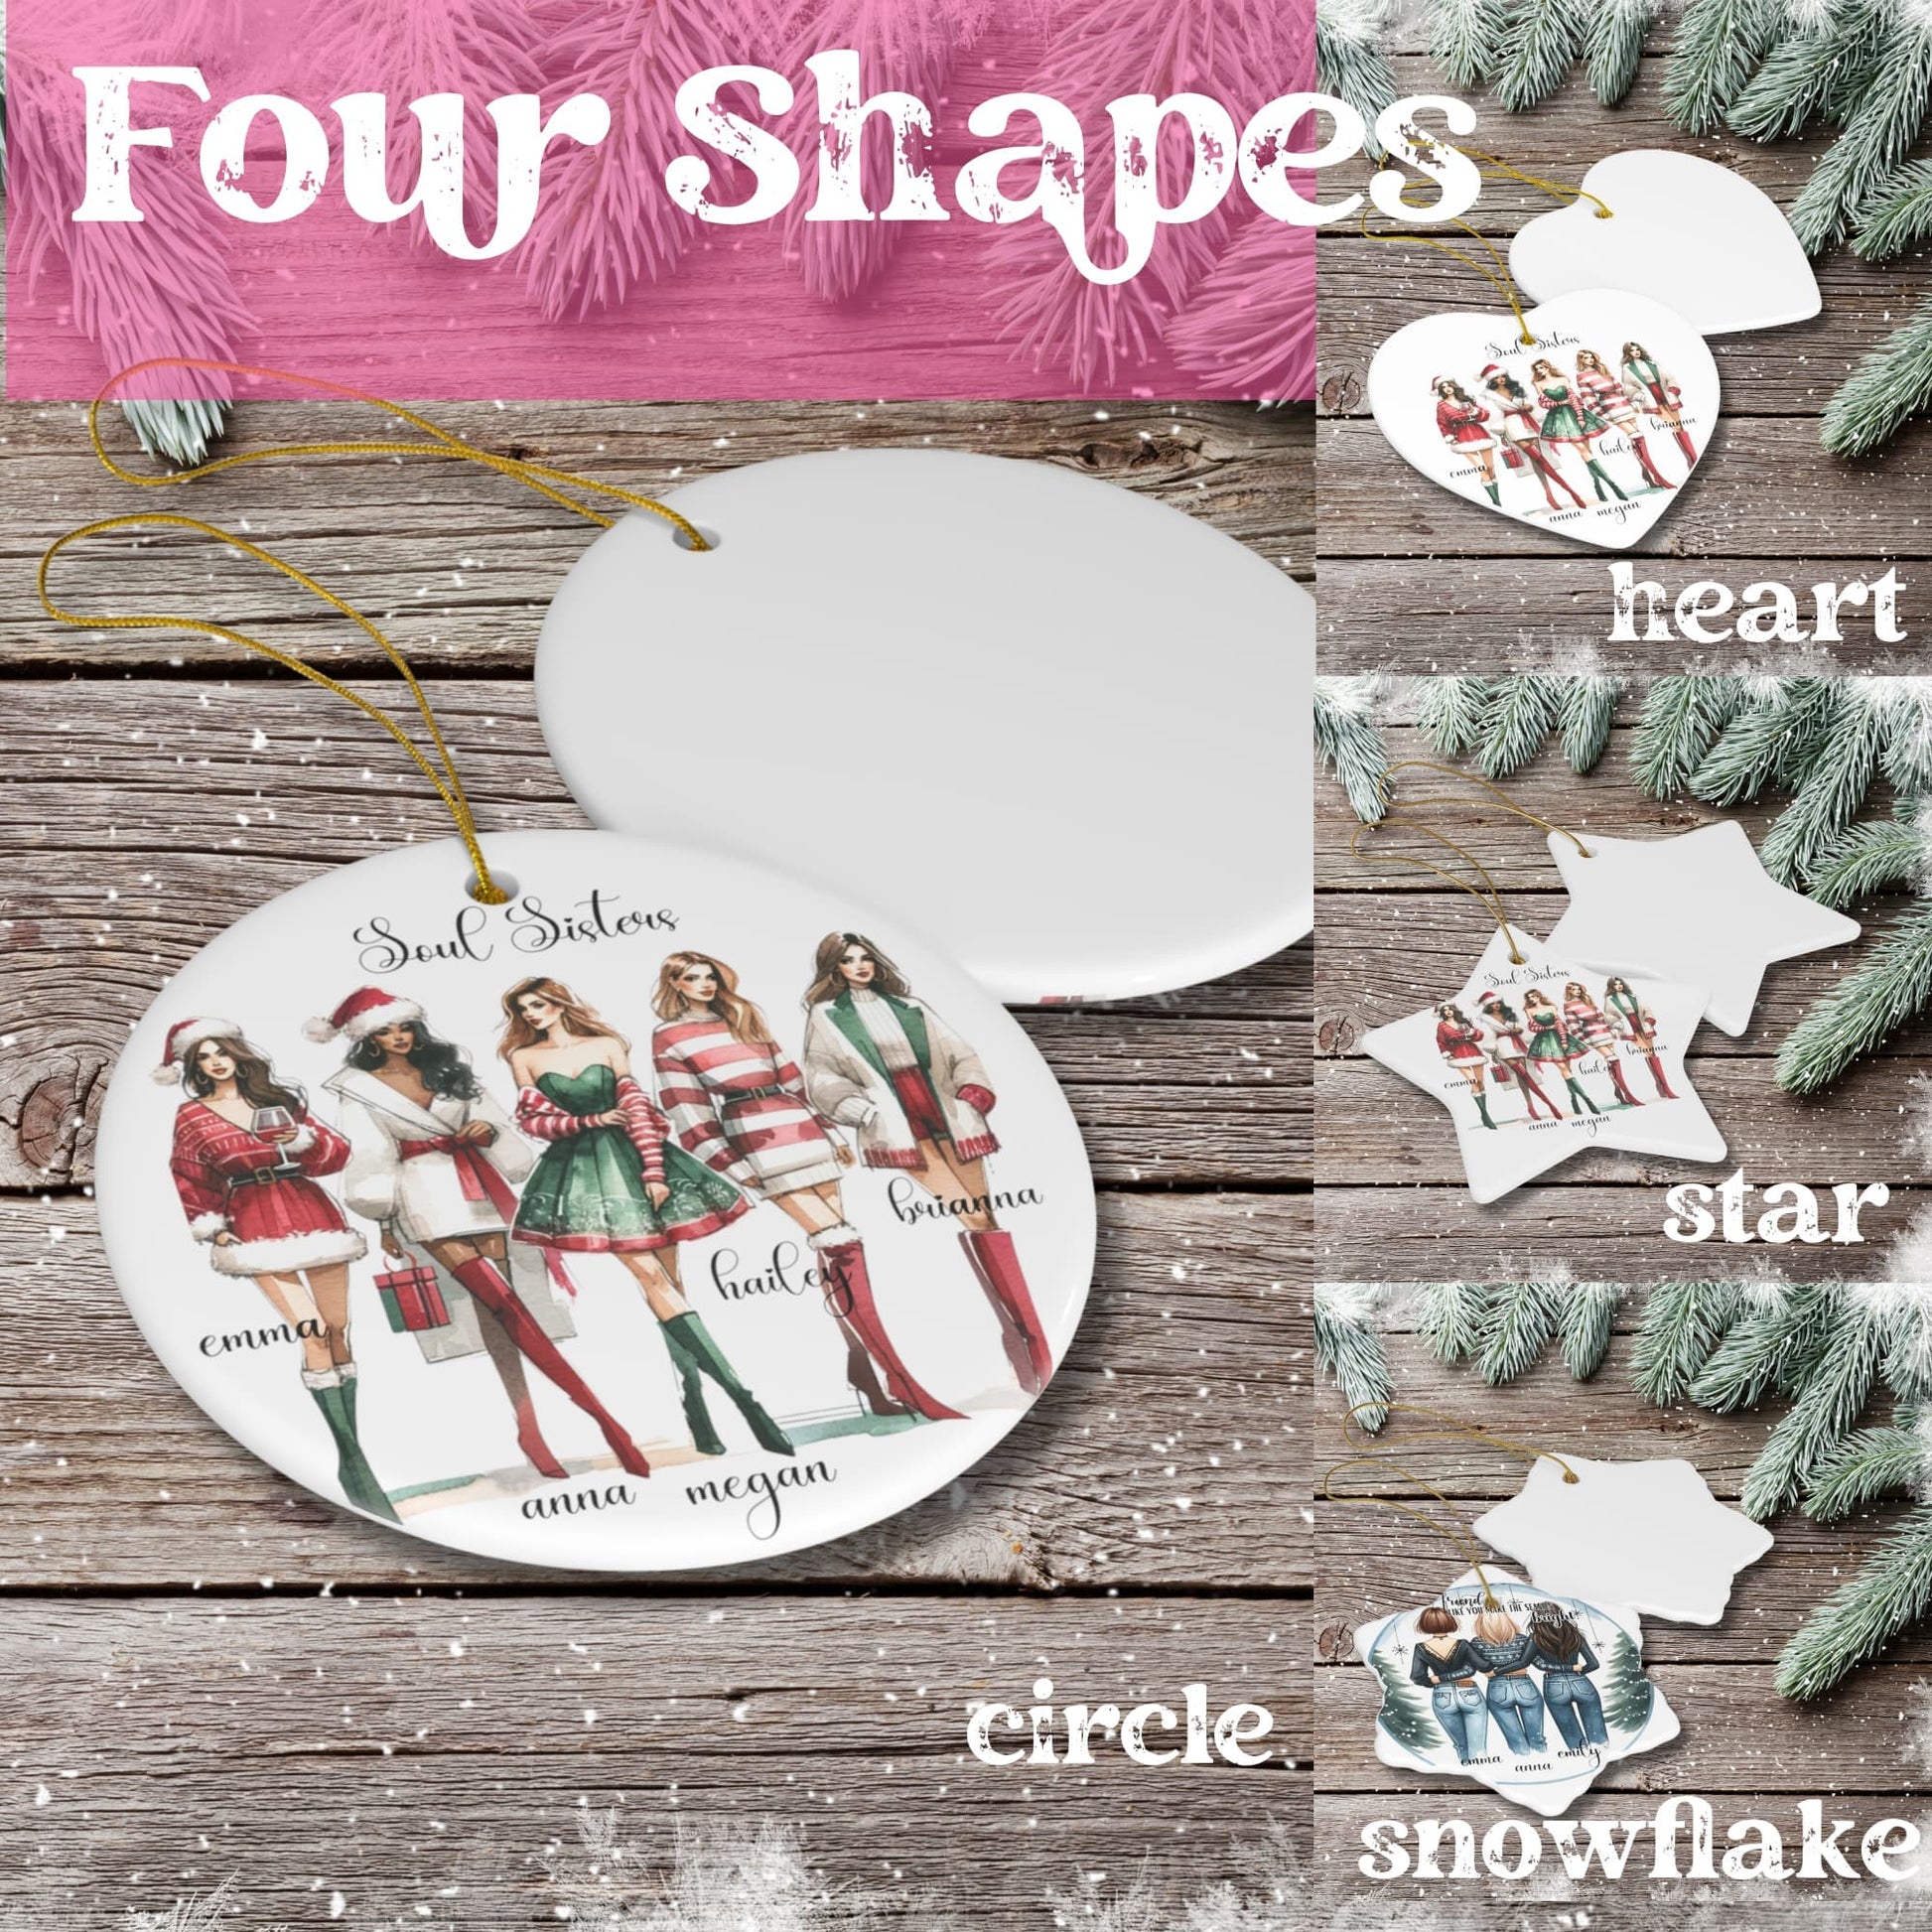 Soul Sisters Christmas ornaments in all four shapes - circle, star, heart, and snowflake - beautifully arranged on a table.